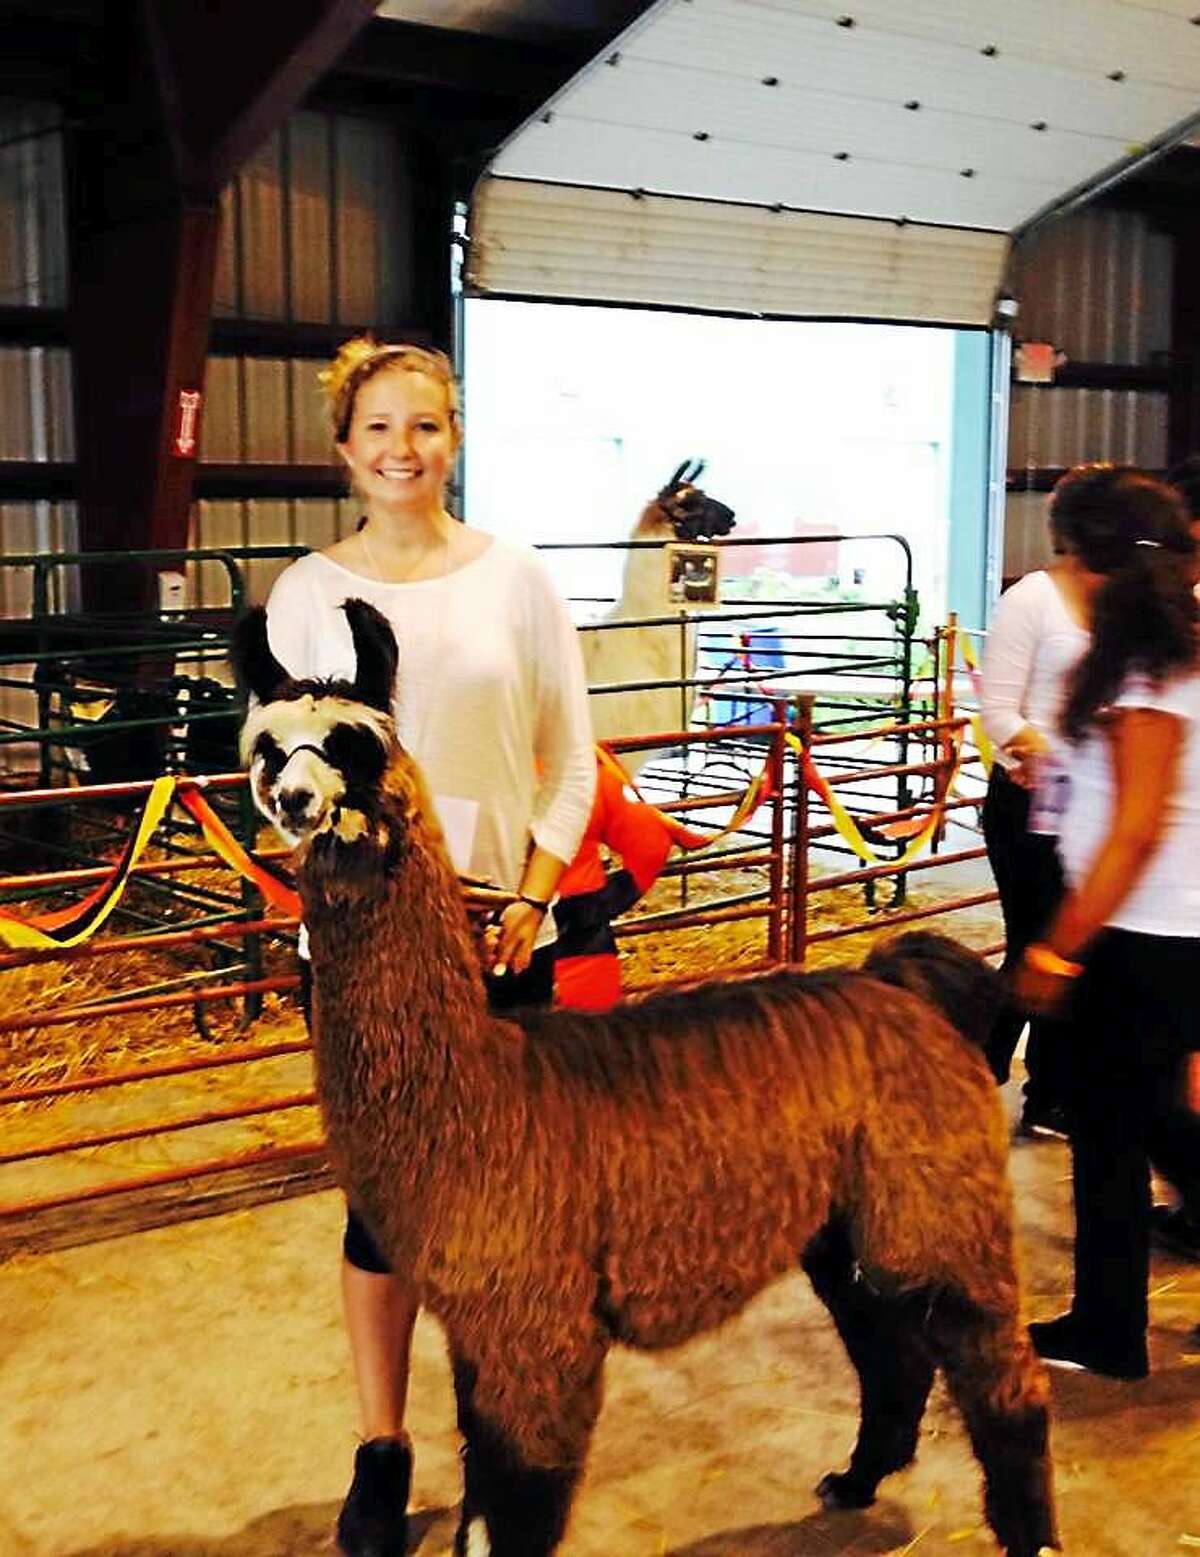 Contributed photo A 4-H club member prepares to show her alpaca at last year's fair, which returns to Middlesex County this weekend.